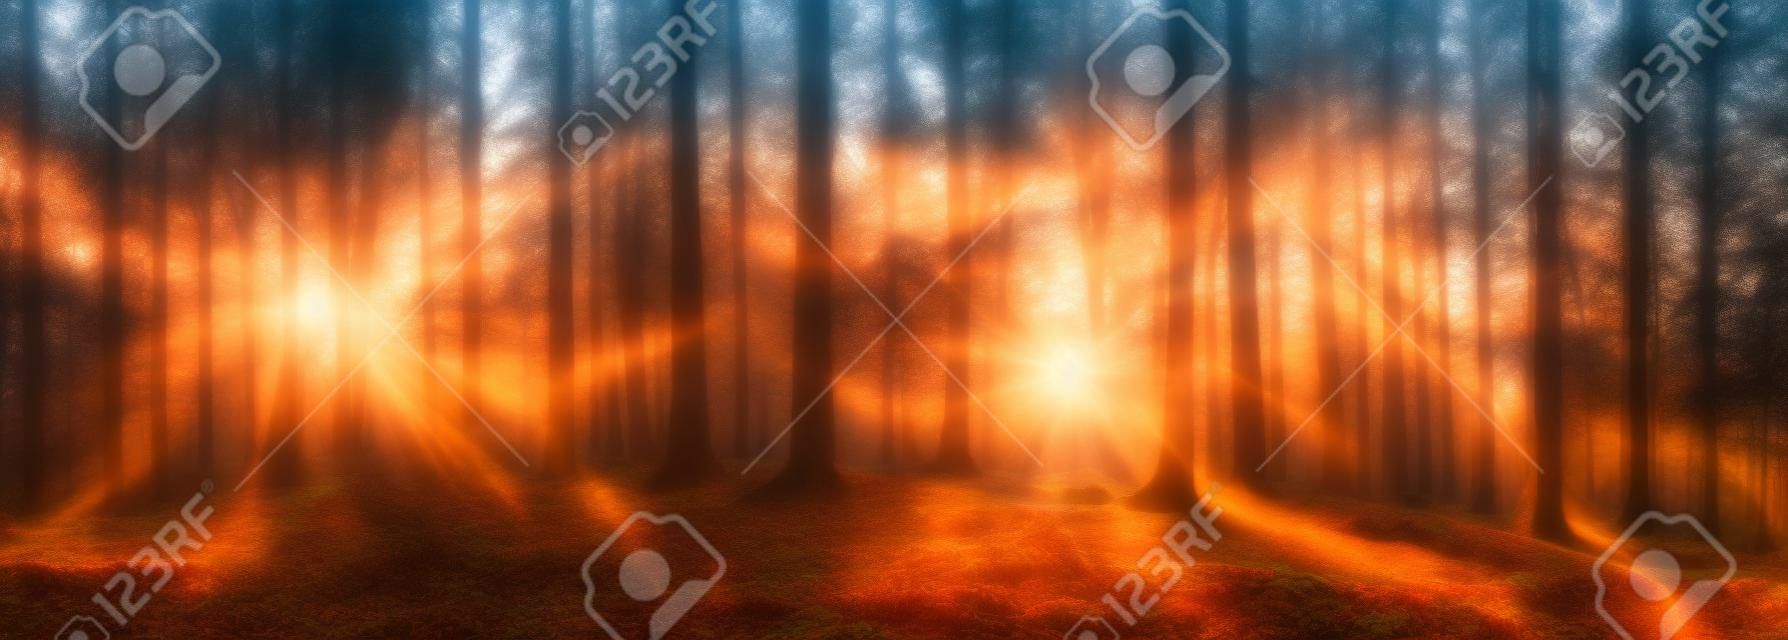 Sunrise in a forest